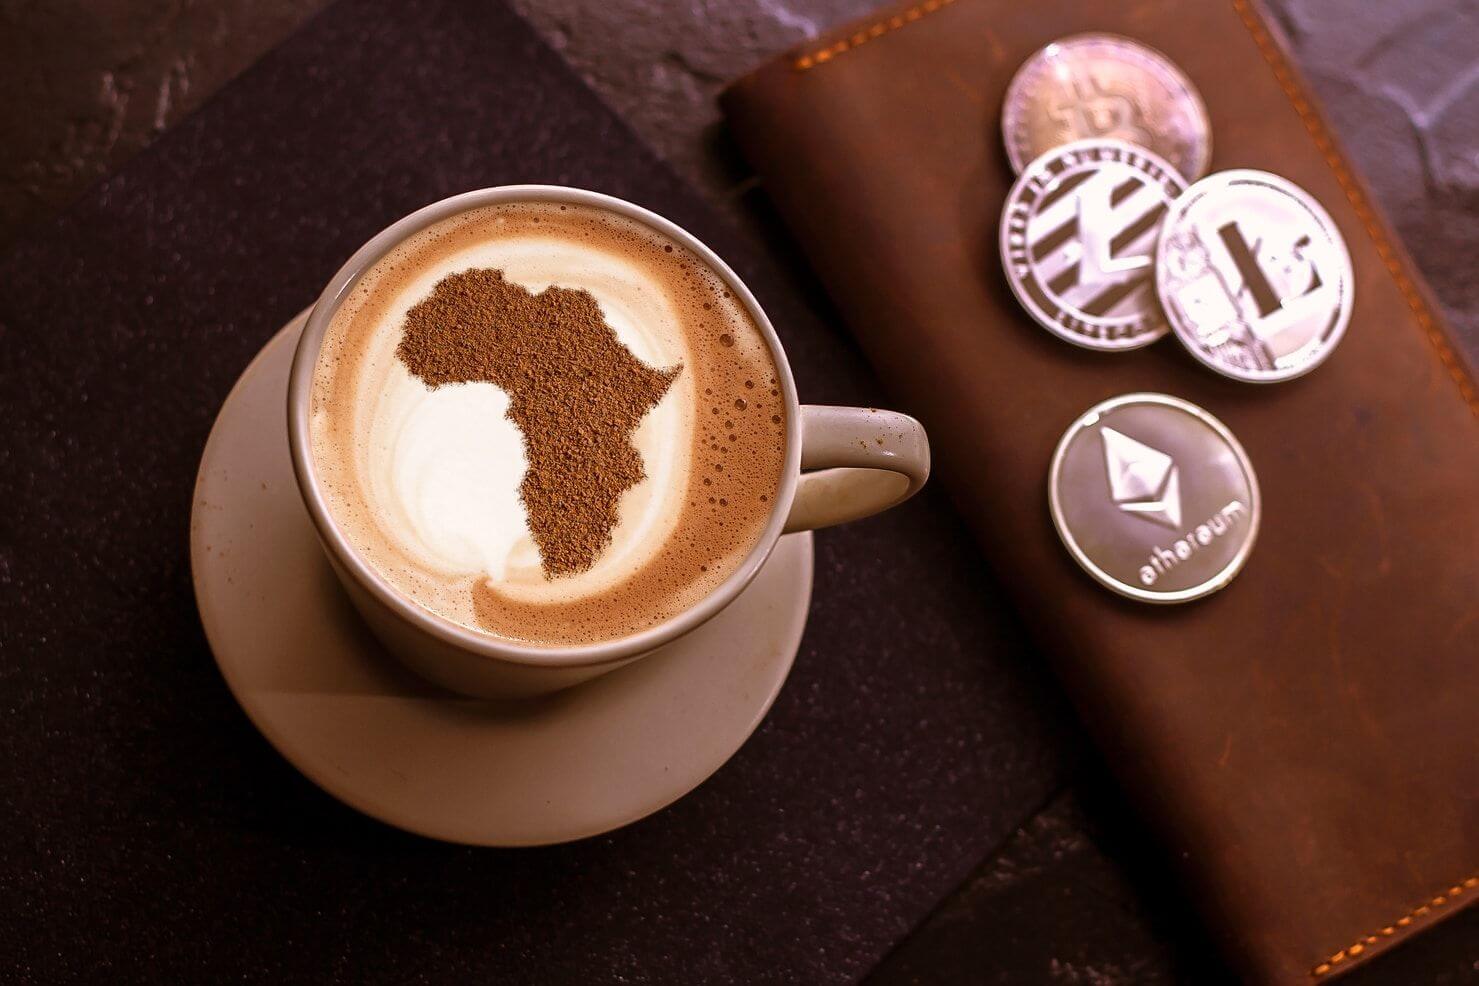 The future of cryptocurrencies in Africa